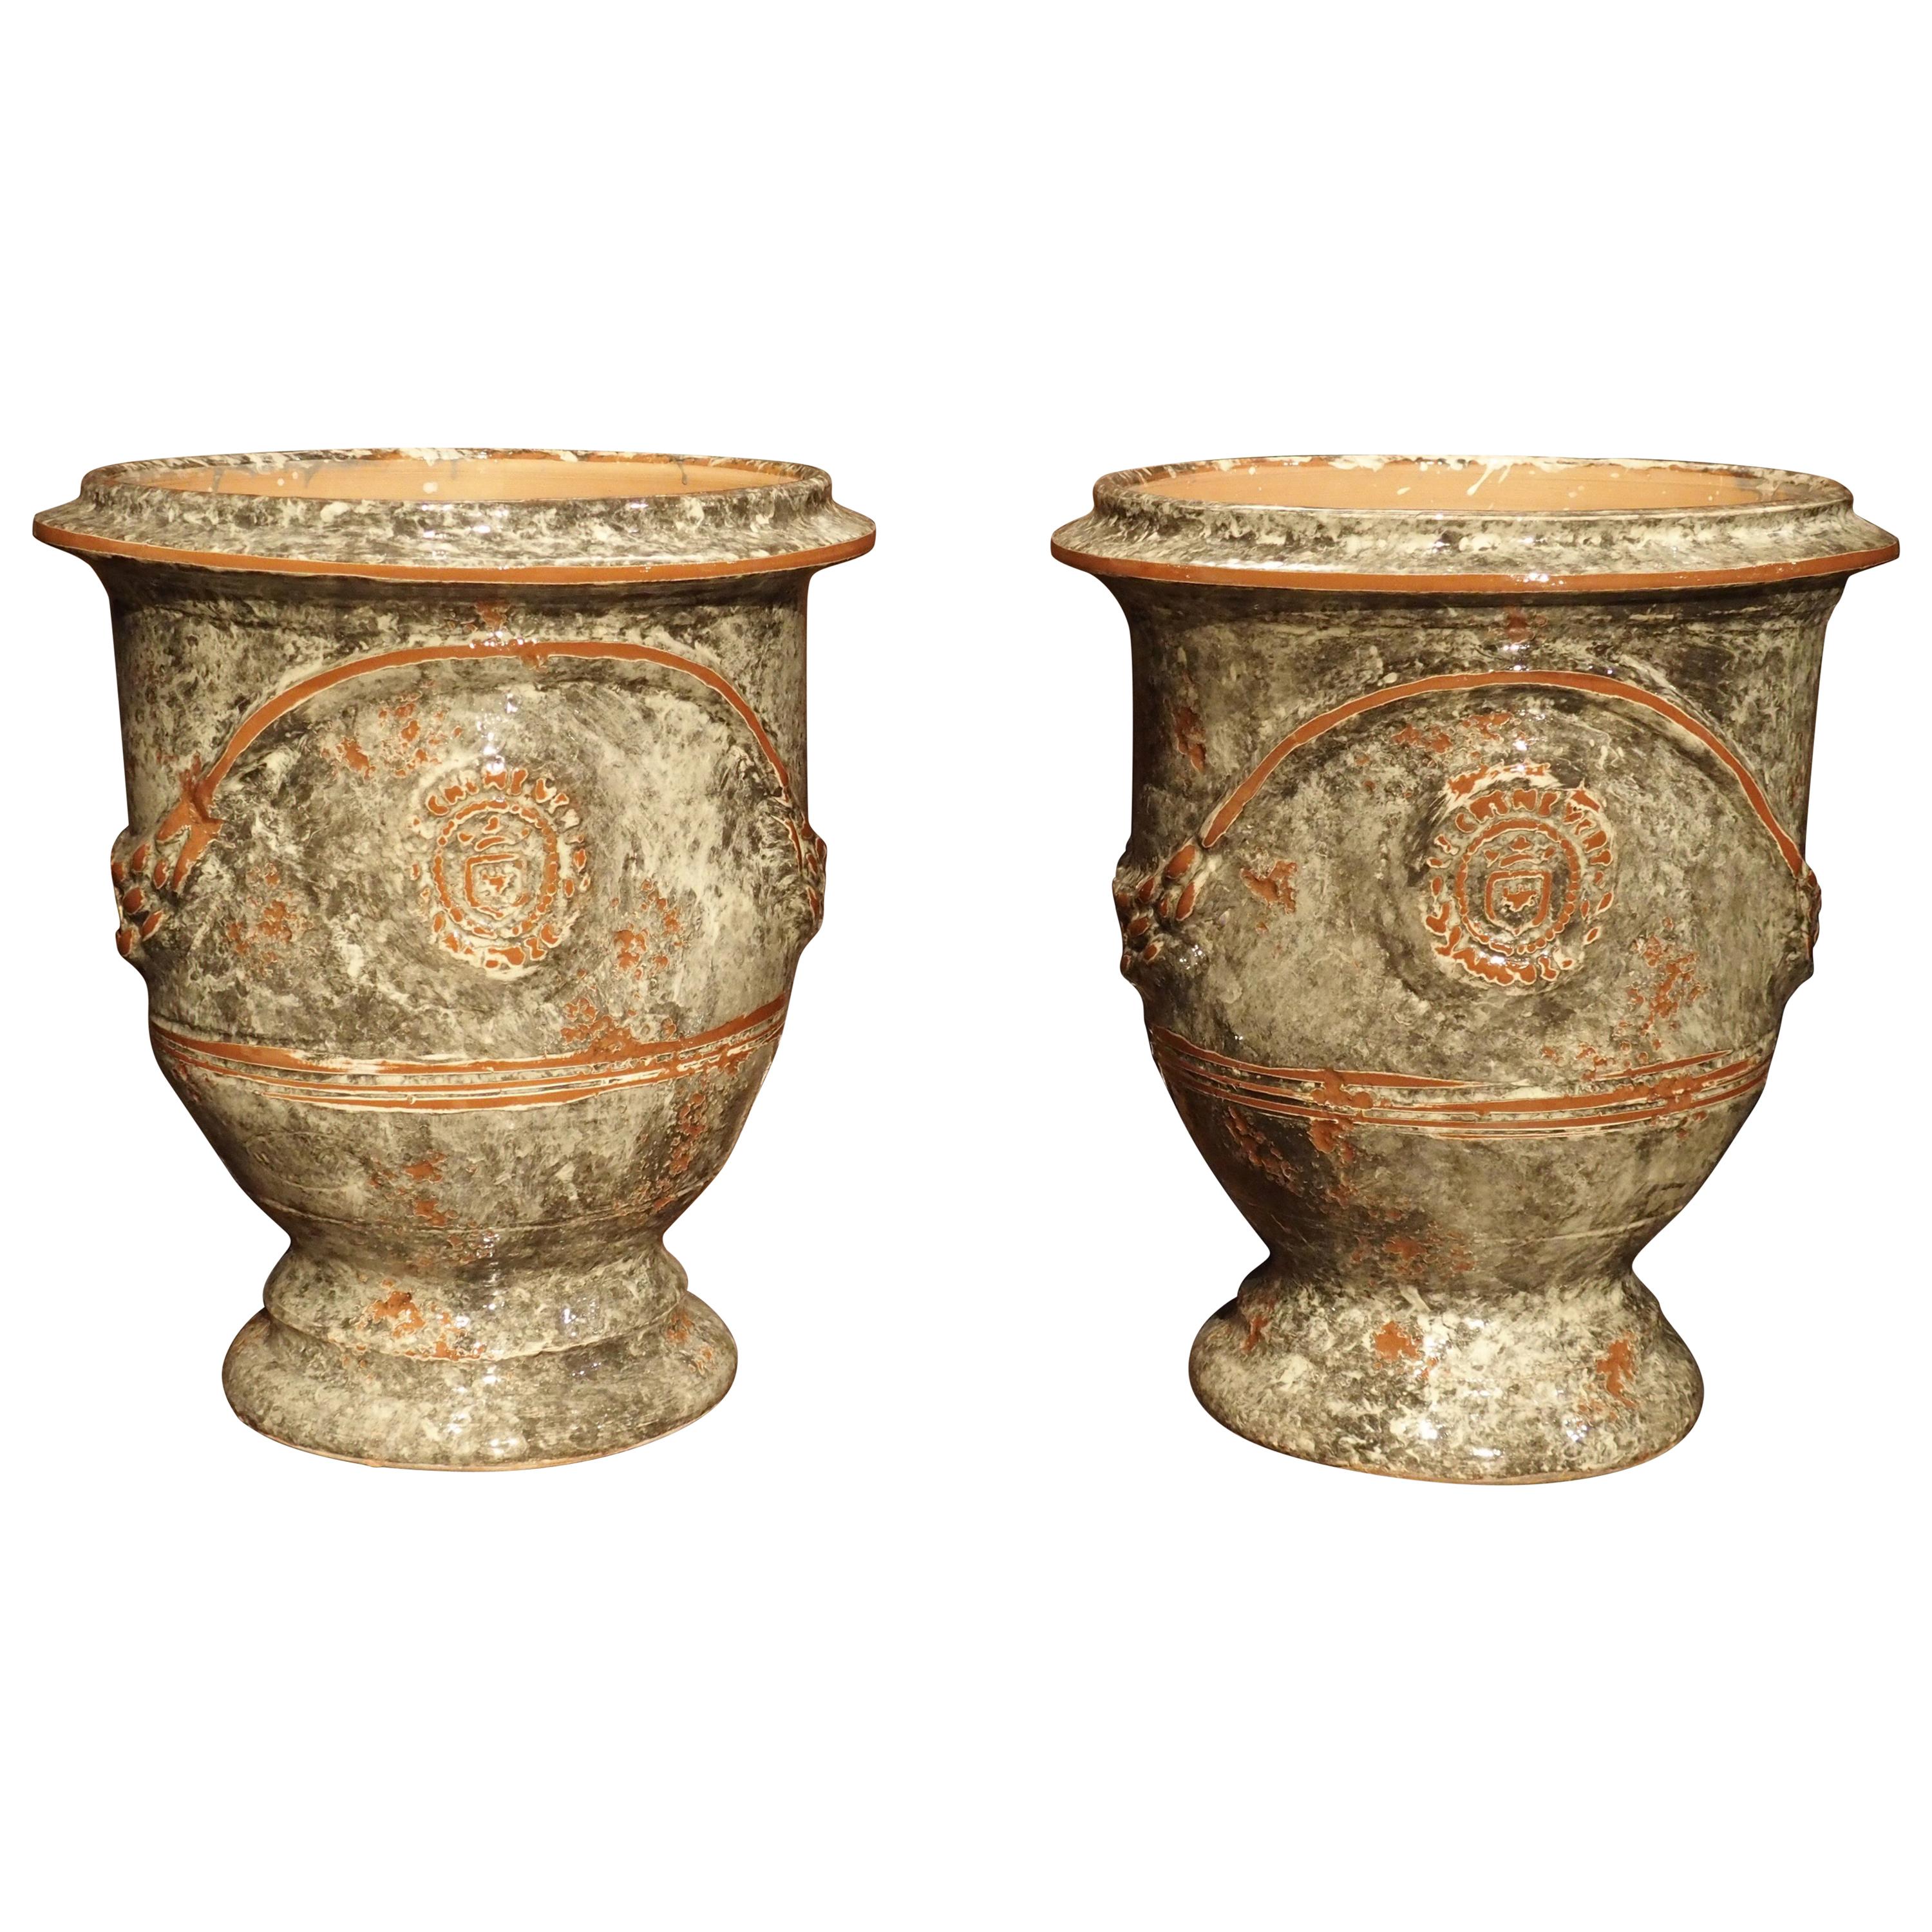 Pair of Small Glazed Terracotta Anduze Pots from France